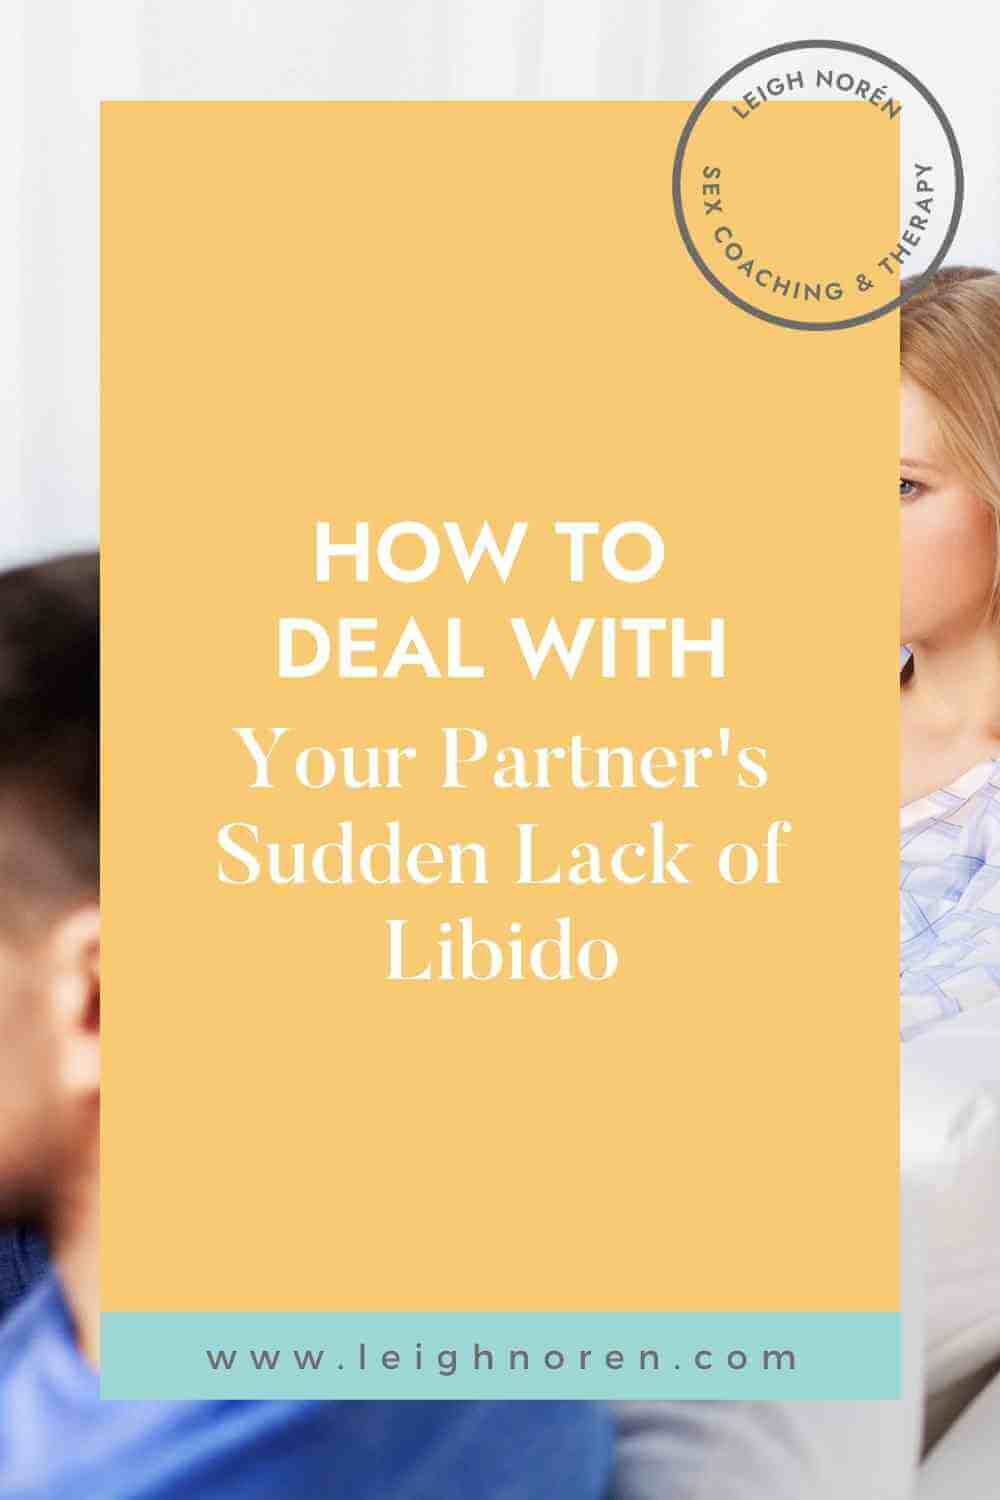 How To Deal With Your Partner's Sudden Lack Of Libido